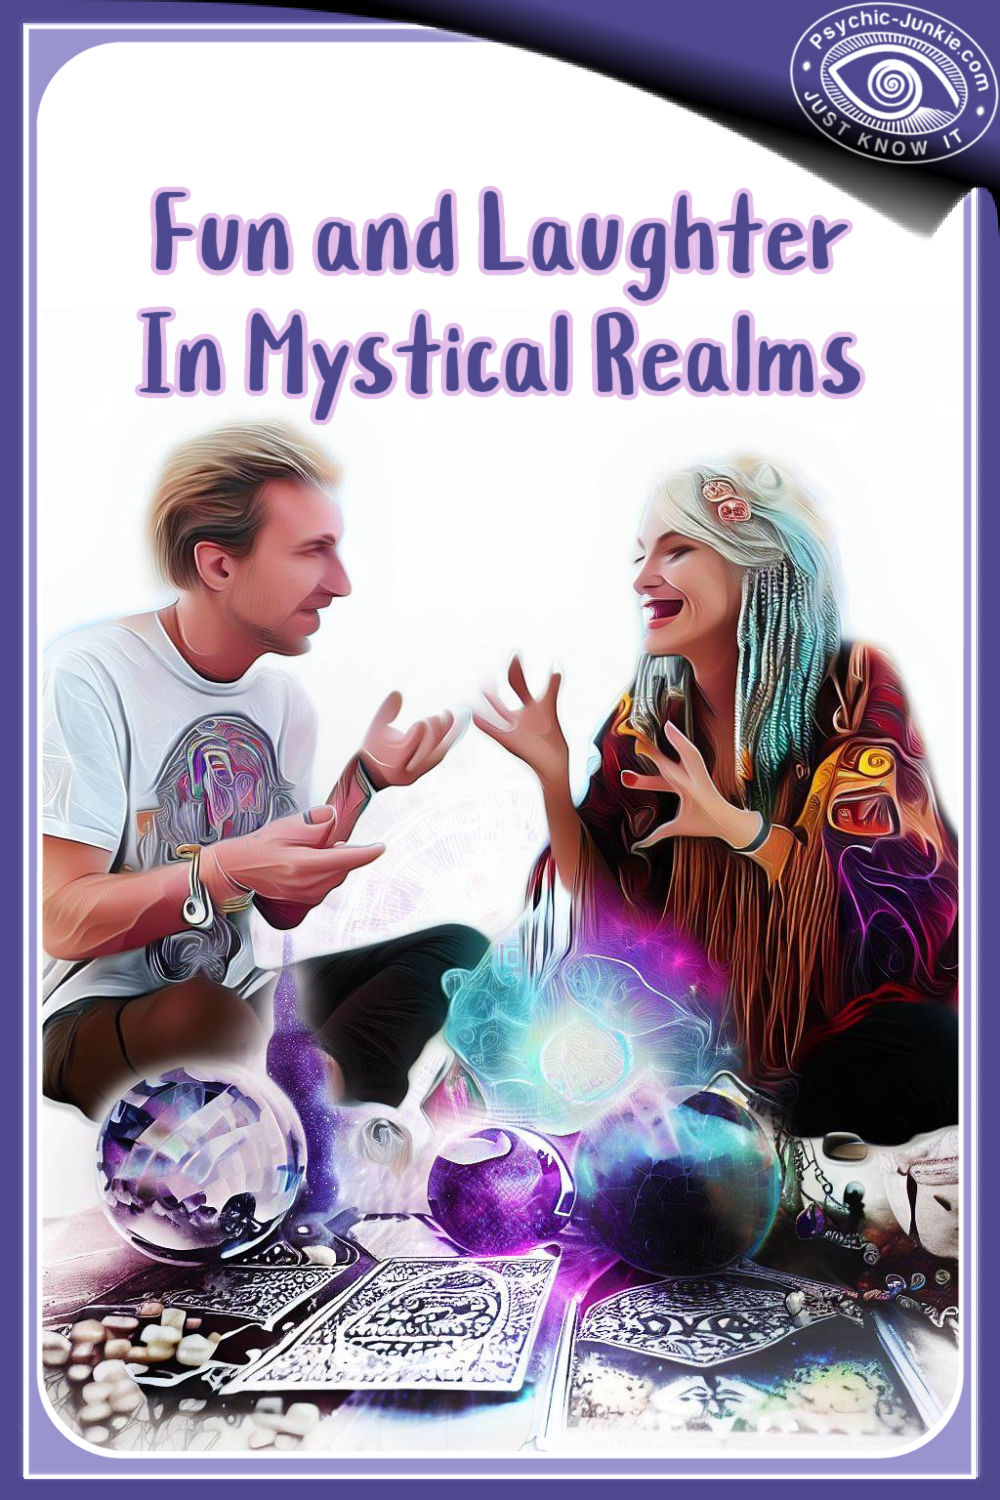 The Best Psychic Jokes For Bringing Fun And Laughter To This Medium